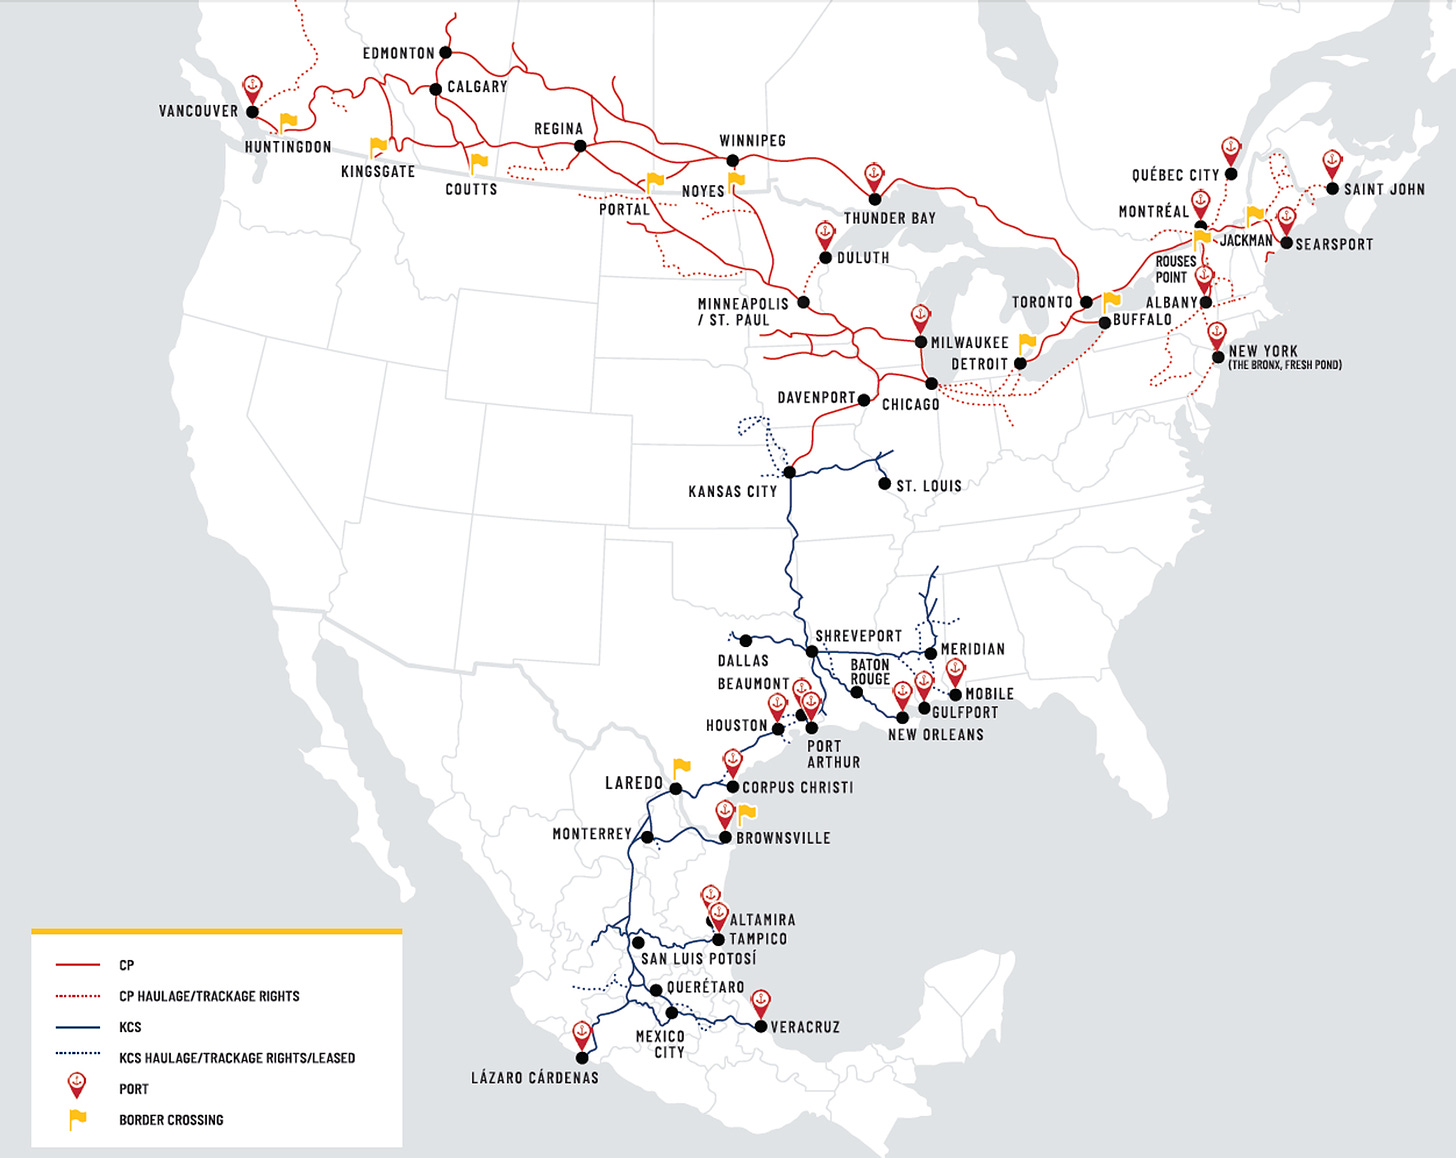 Canadian Pacific, Kansas City Southern merger to redraw Class I railroad  map - Trains